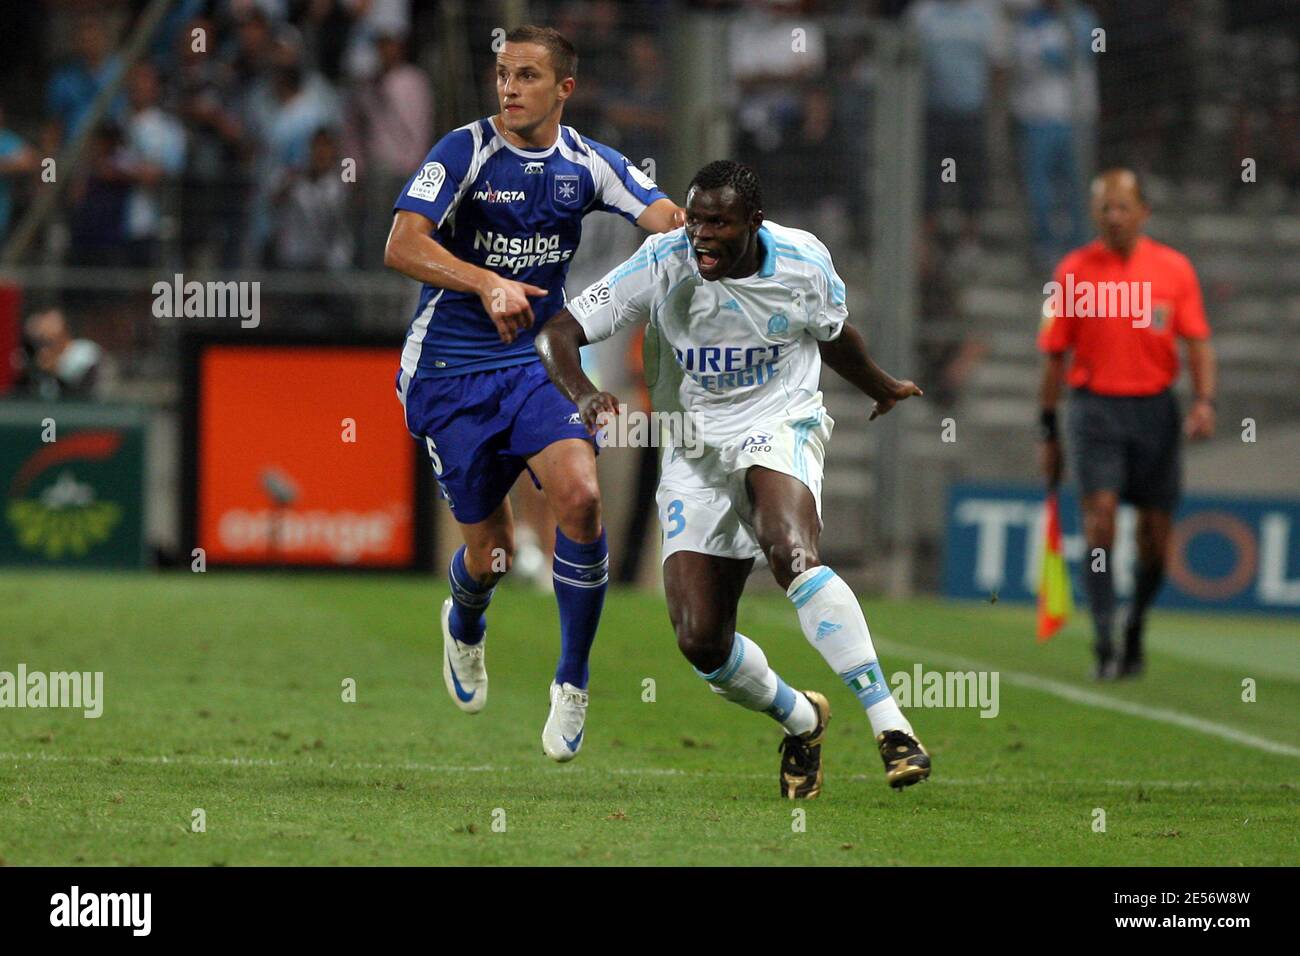 Auxerre's Dariusz Dudka during the match against Marseille in Marseille, France on August 17, 2008 at the Stade Velodrome. Marseille won 4-0. Photo by Stuart Morton/Cameleon/ABACAPRESS.COM Stock Photo